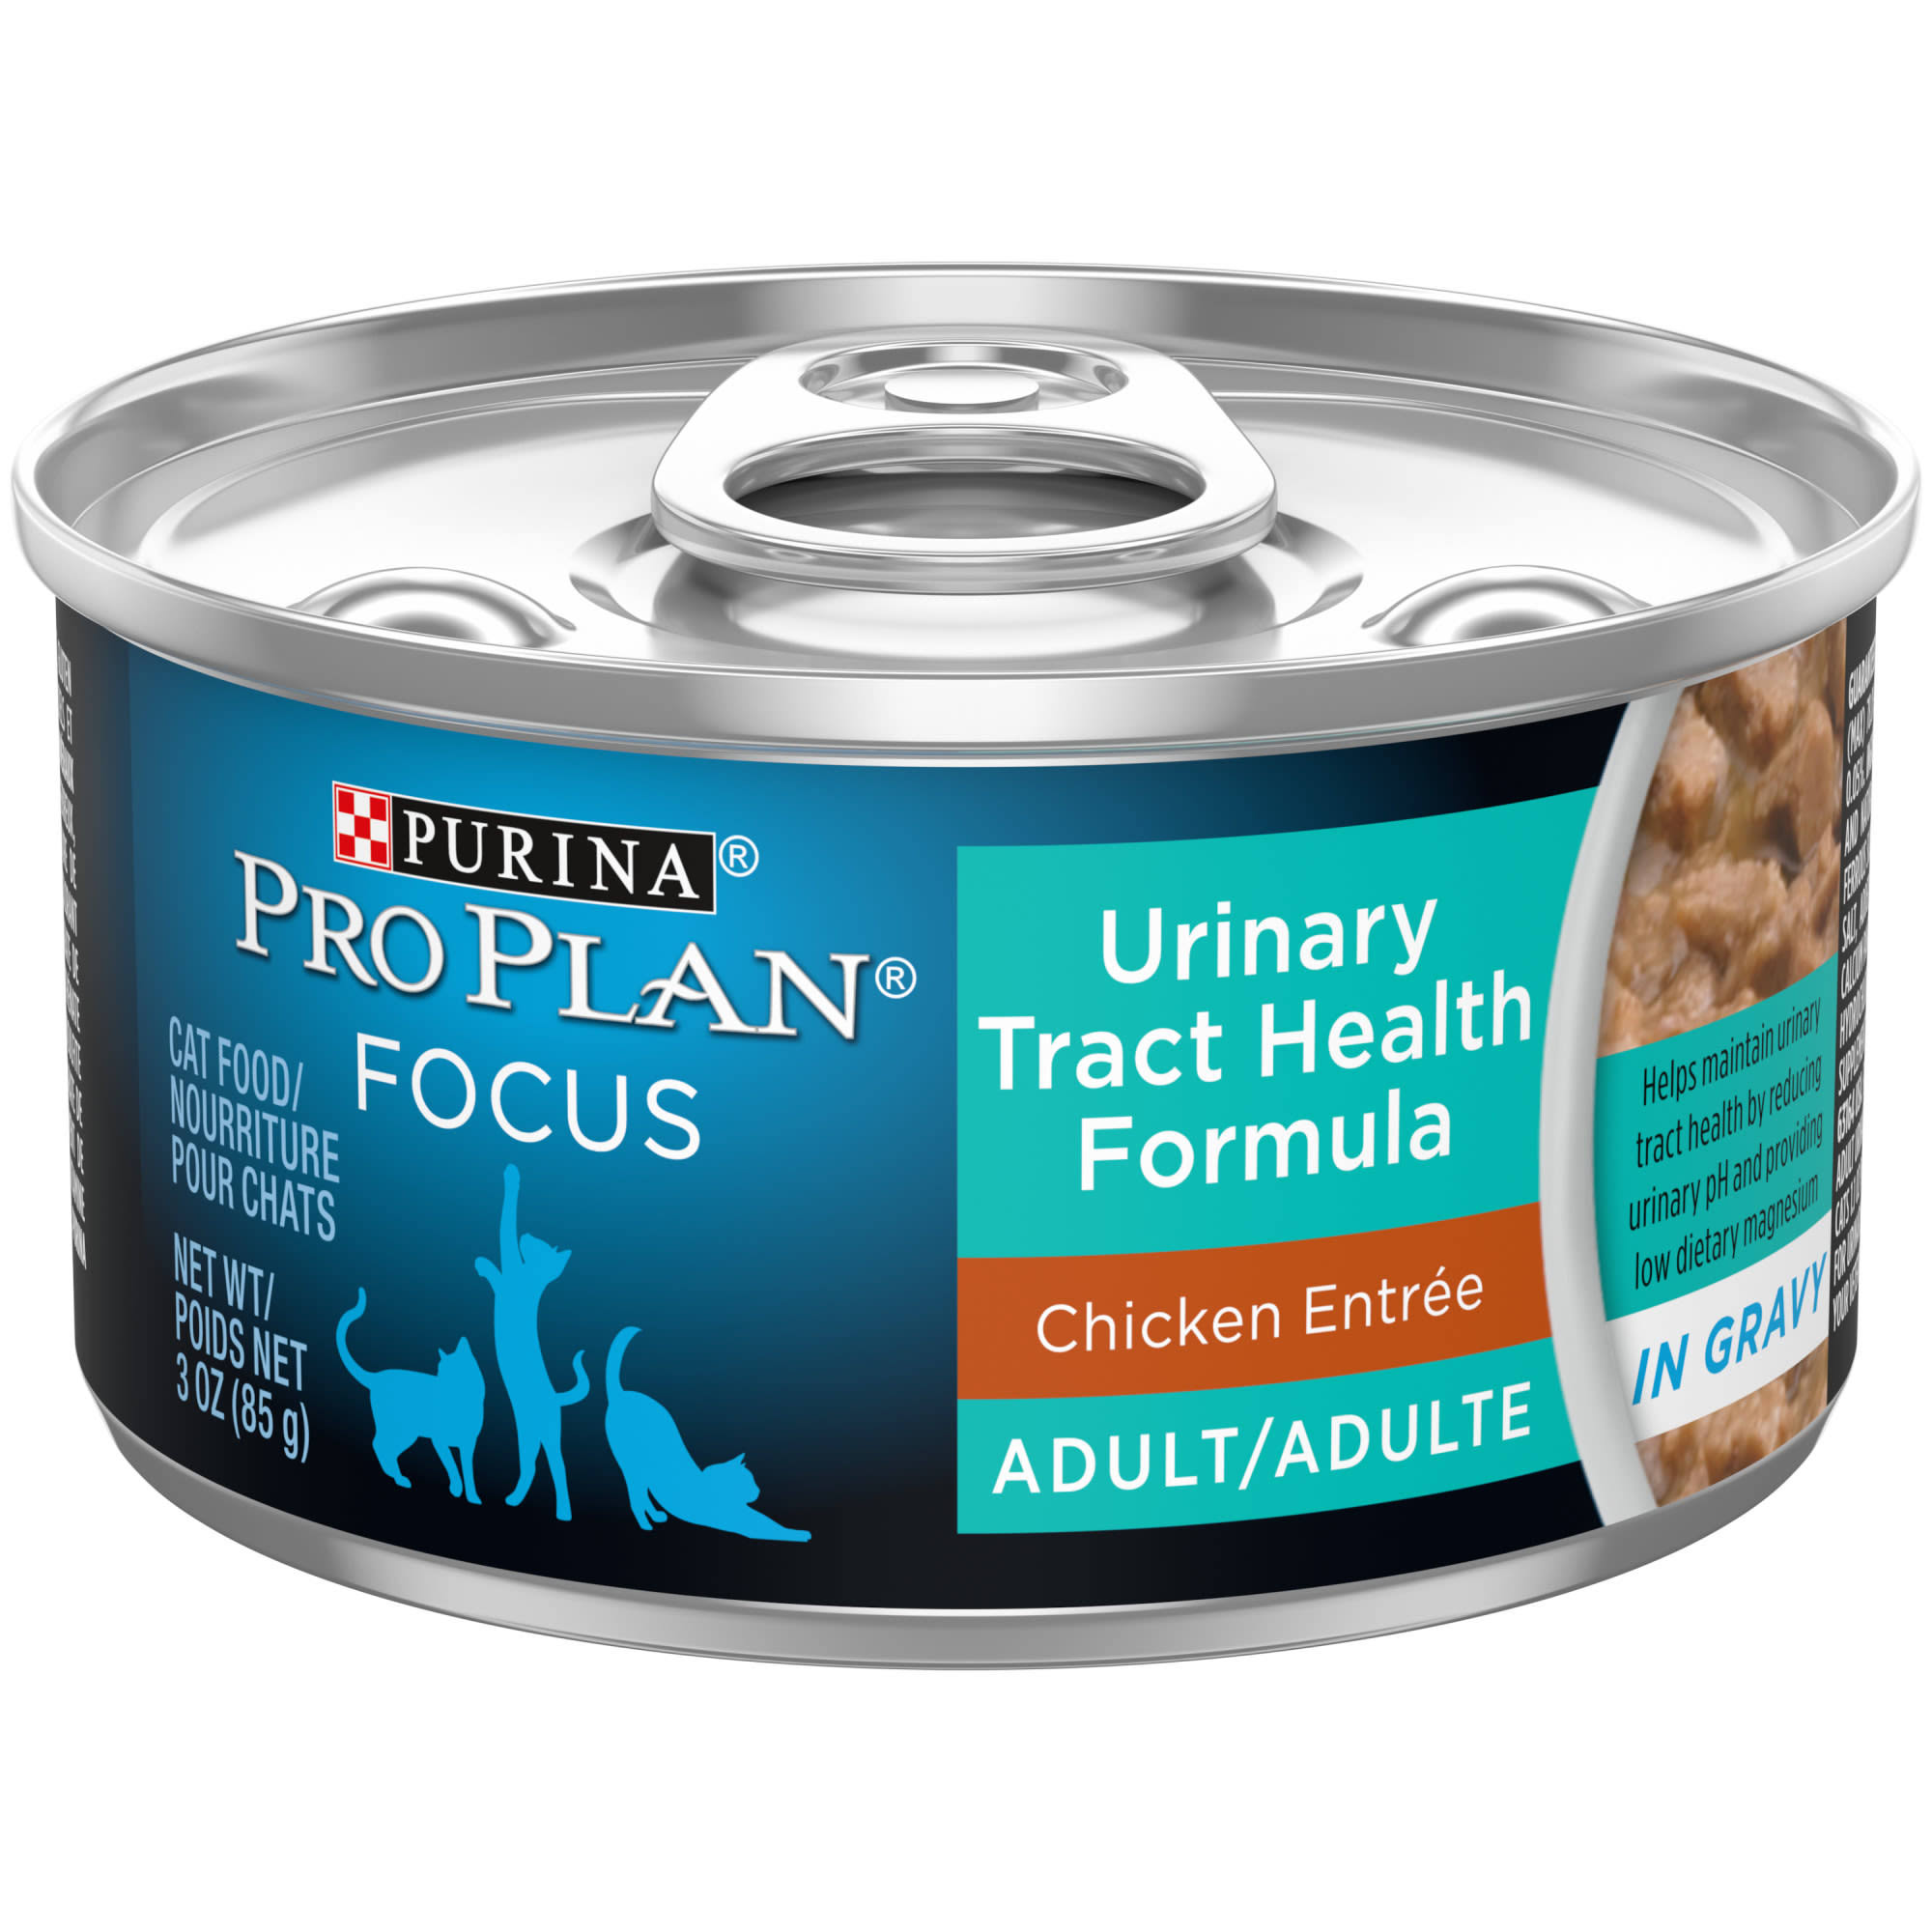 Purina Pro Plan Adult Canned Cat Food - Gravy Chicken, 3oz